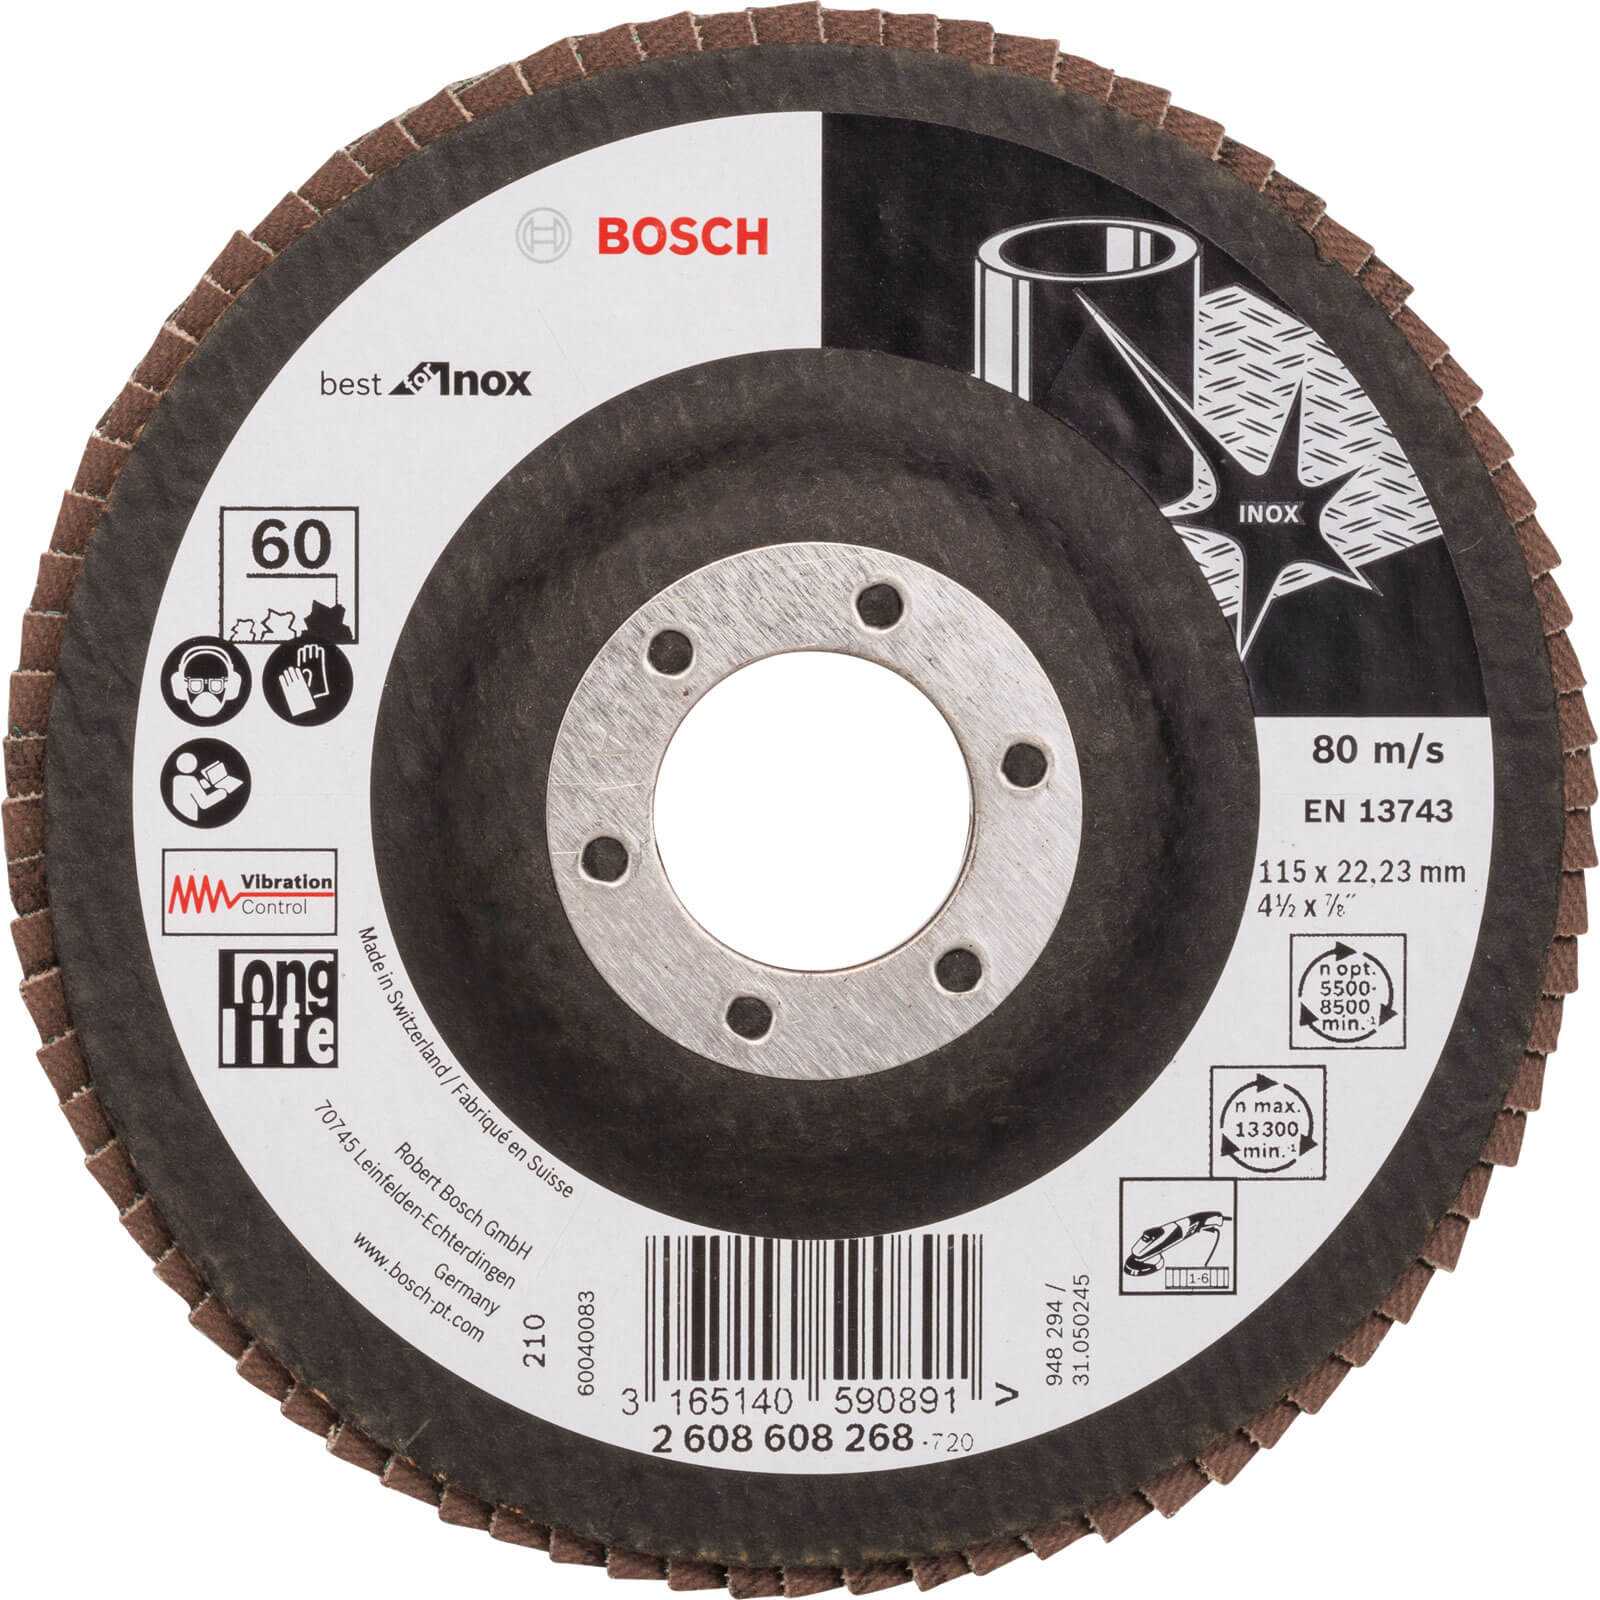 Photos - Cutting Disc Bosch X581 Best for Inox Straight Flap Disc 115mm 60g Pack of 1 2608608268 